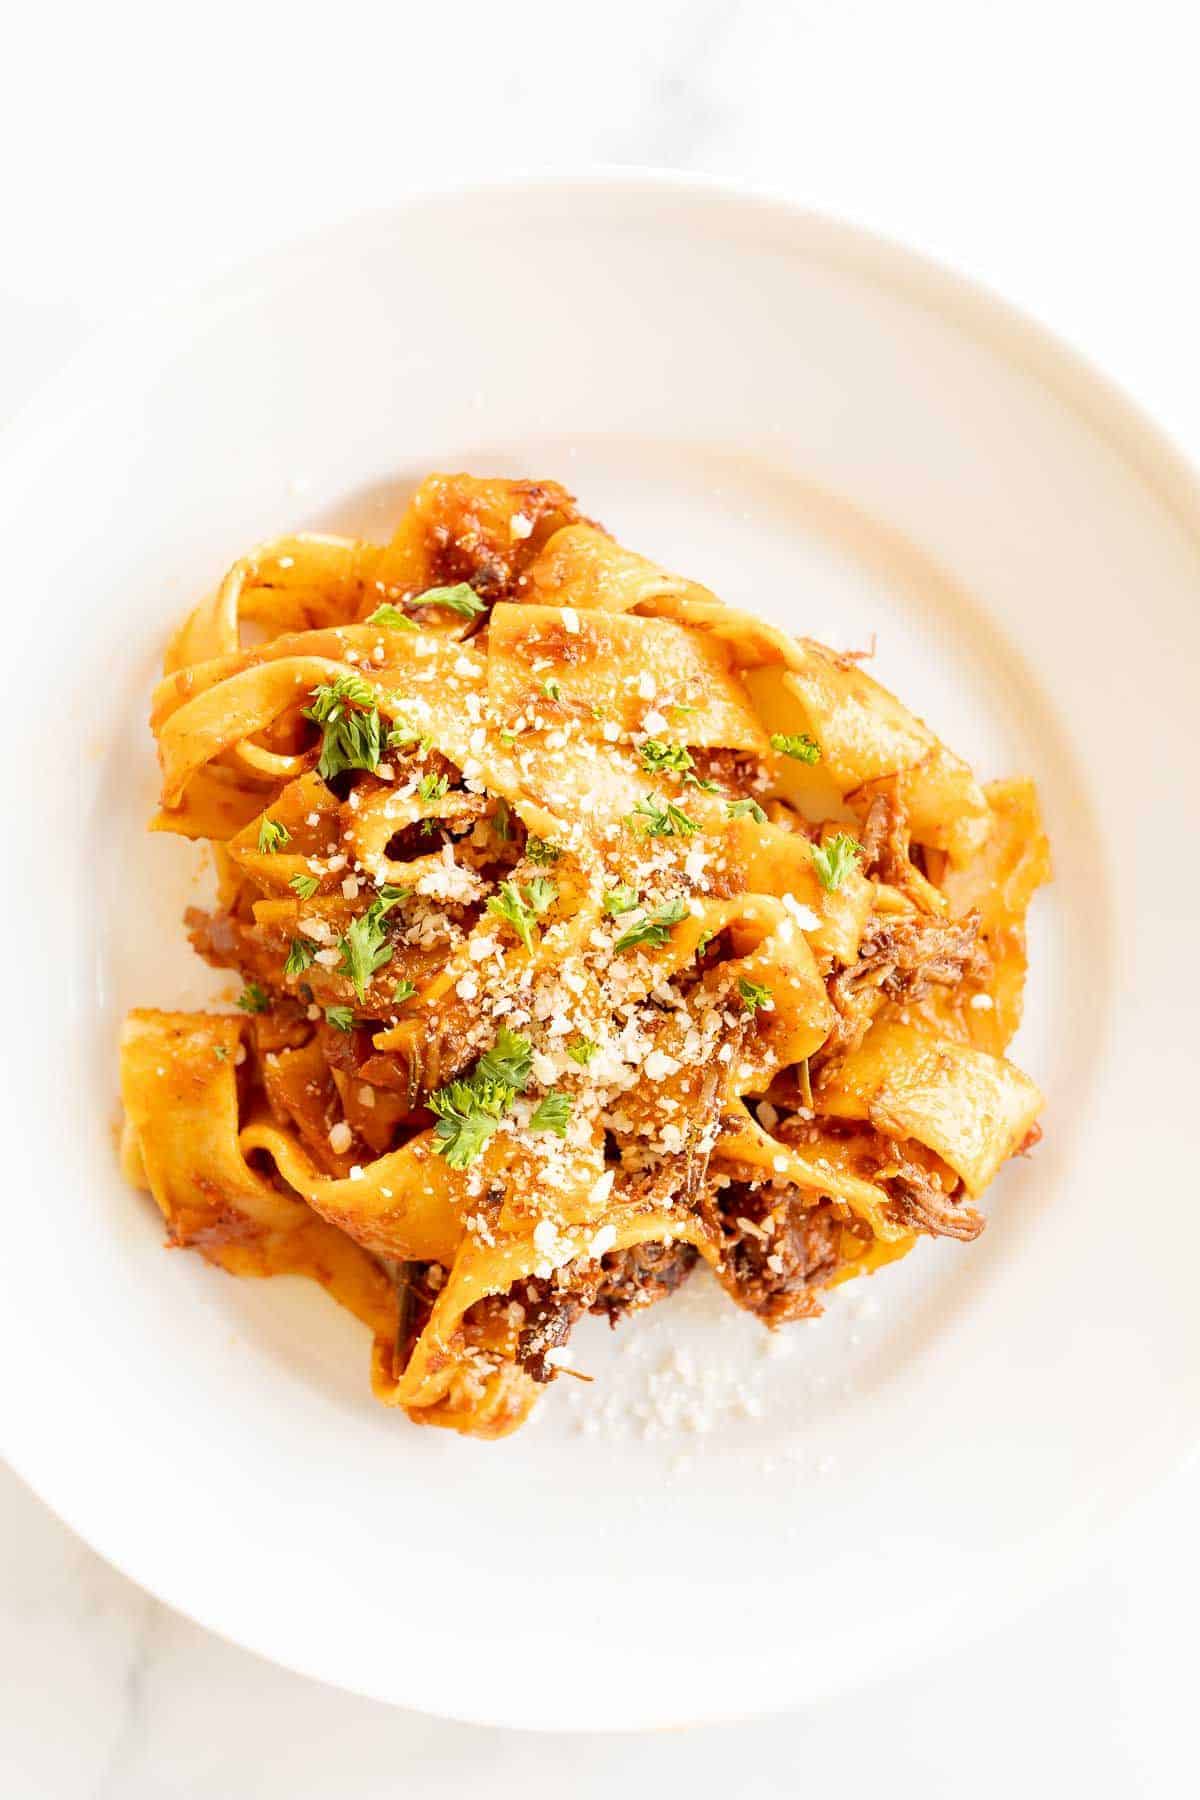 A small white plate with pappardelle pasta, emulsified with a red sauce.